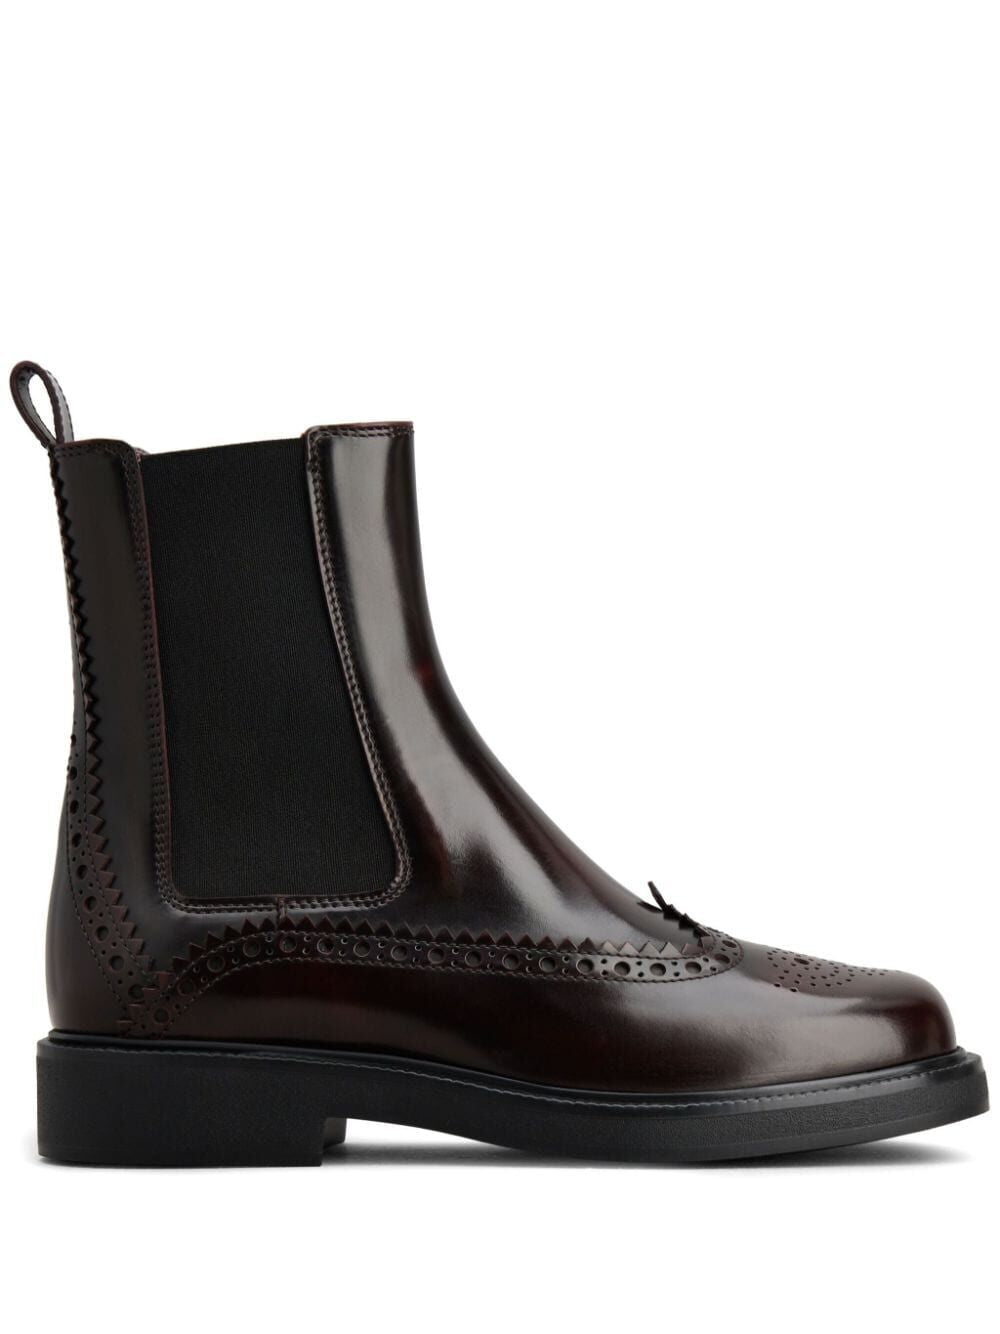 TOD'S BROGUESTYLE CHELSEA BOOTS